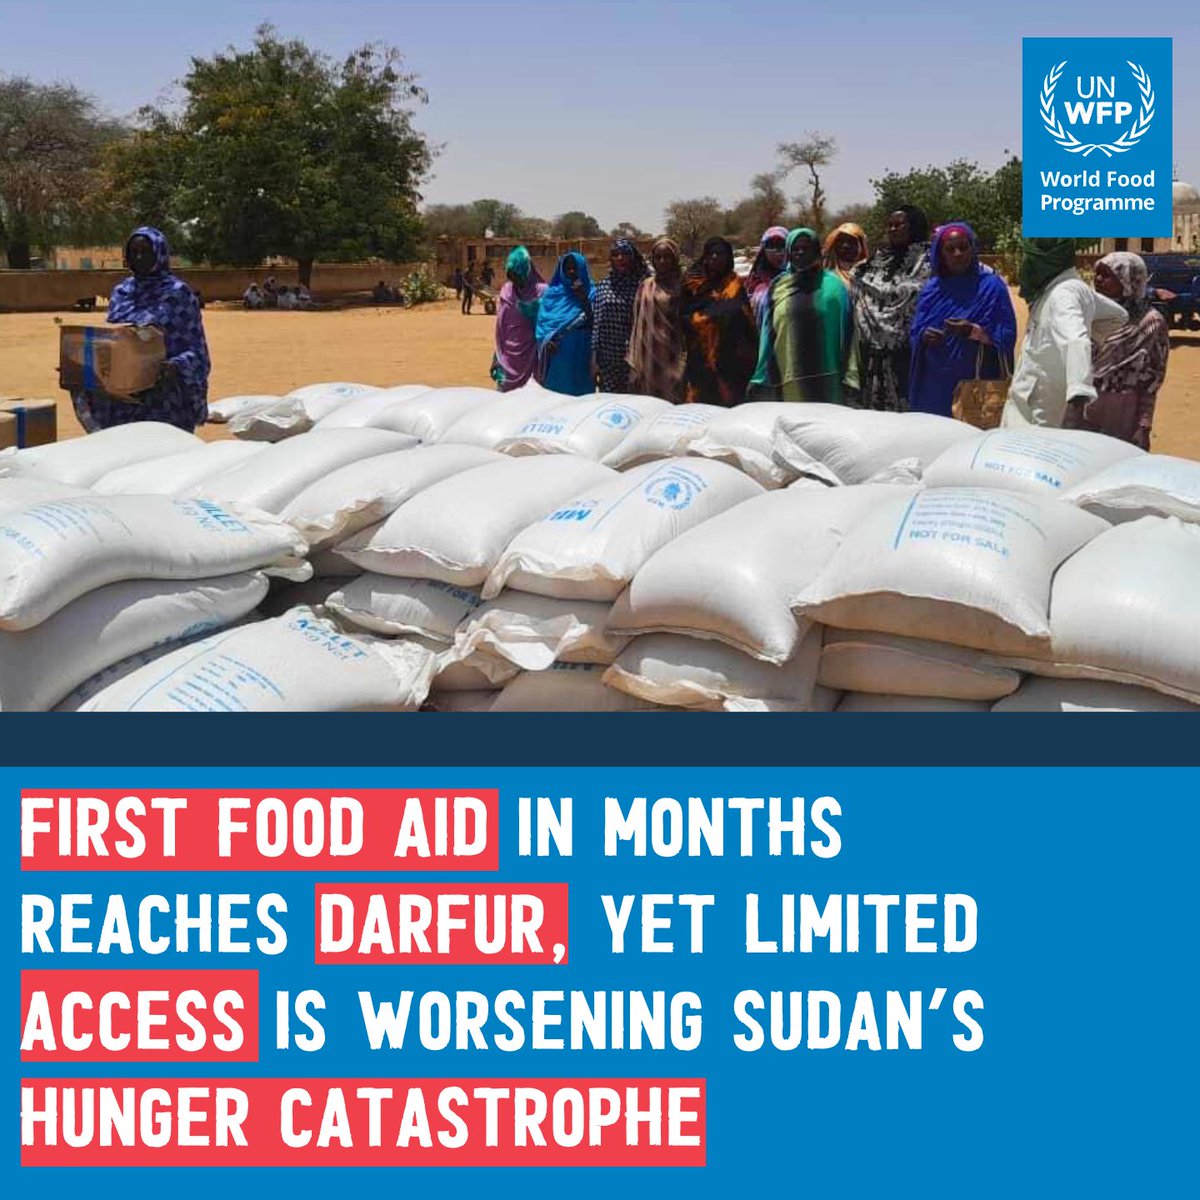 #ThisJustIn: First food aid in months reaches #Darfur Yet this is NOT enough as millions struggle to have a basic meal a day All routes & corridors MUST remain open for @WFP to ramp up life-saving assistance to vulnerable communities #NEWS Release➡️wfp.org/news/first-foo…